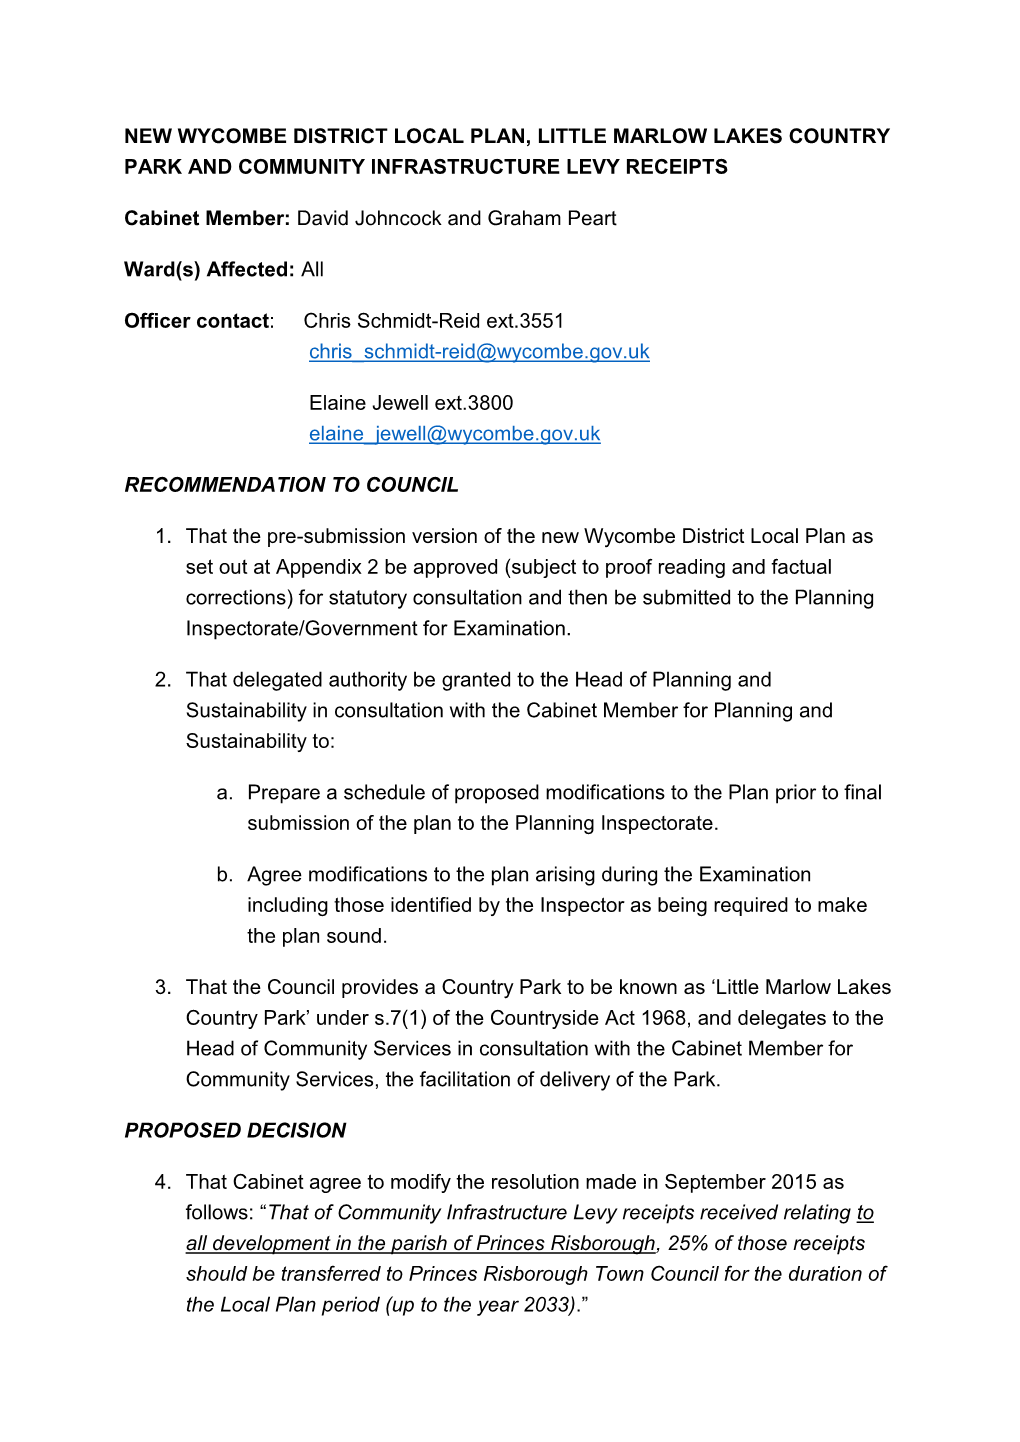 New Wycombe District Local Plan, Little Marlow Lakes Country Park and Community Infrastructure Levy Receipts